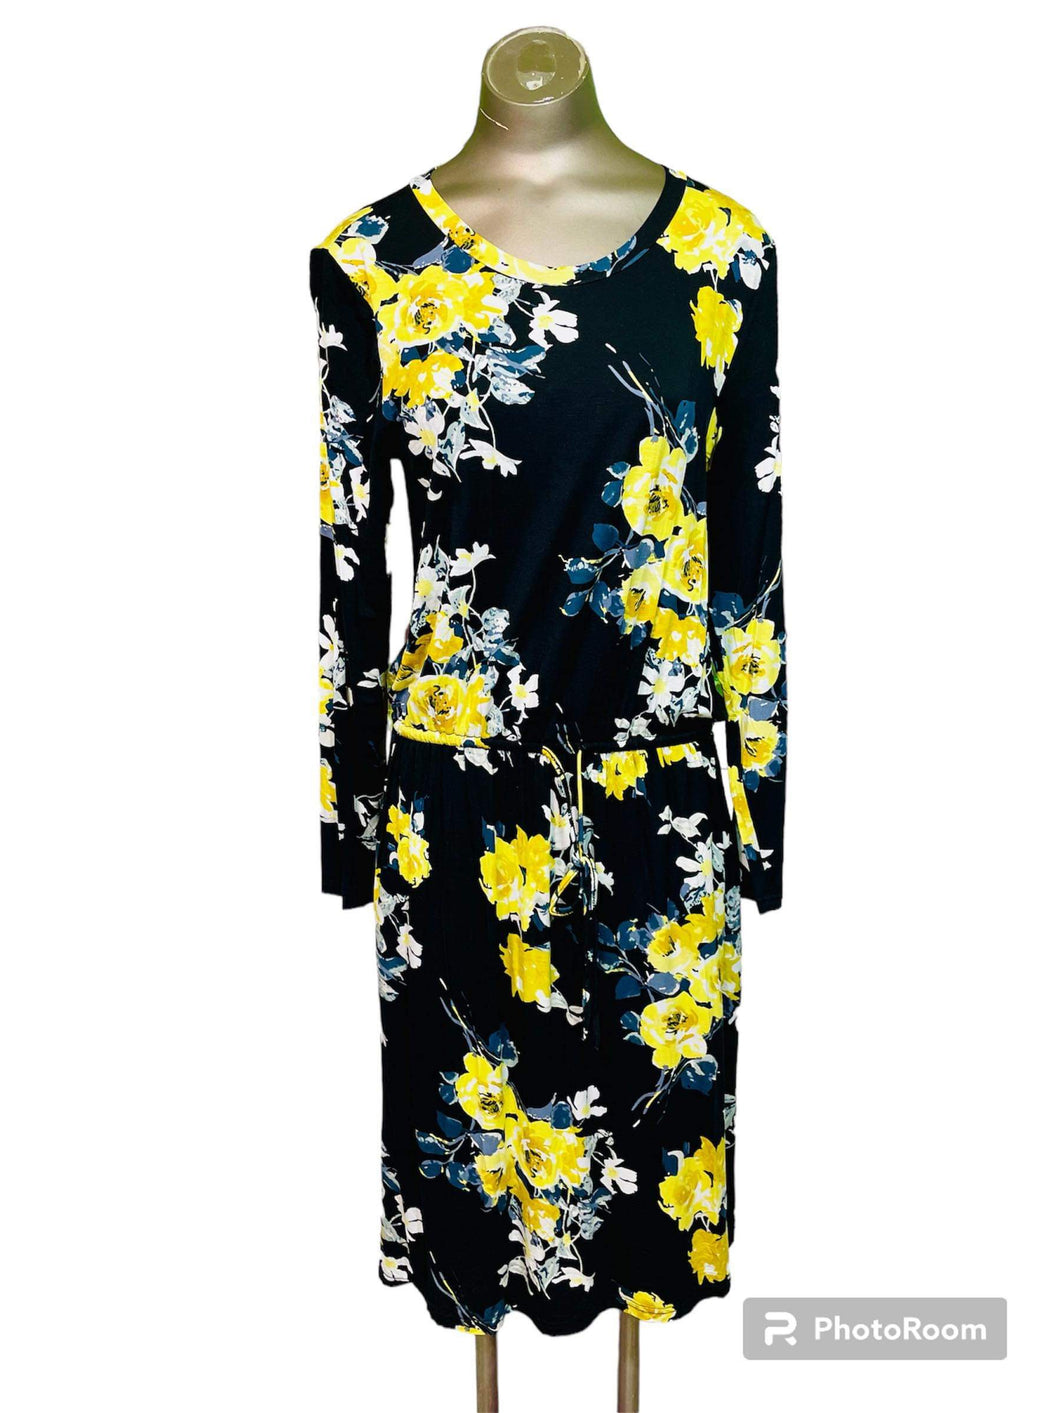 Brand New $20 Women's Black And Yellow Floral Dress Large Great Stretch With Waist